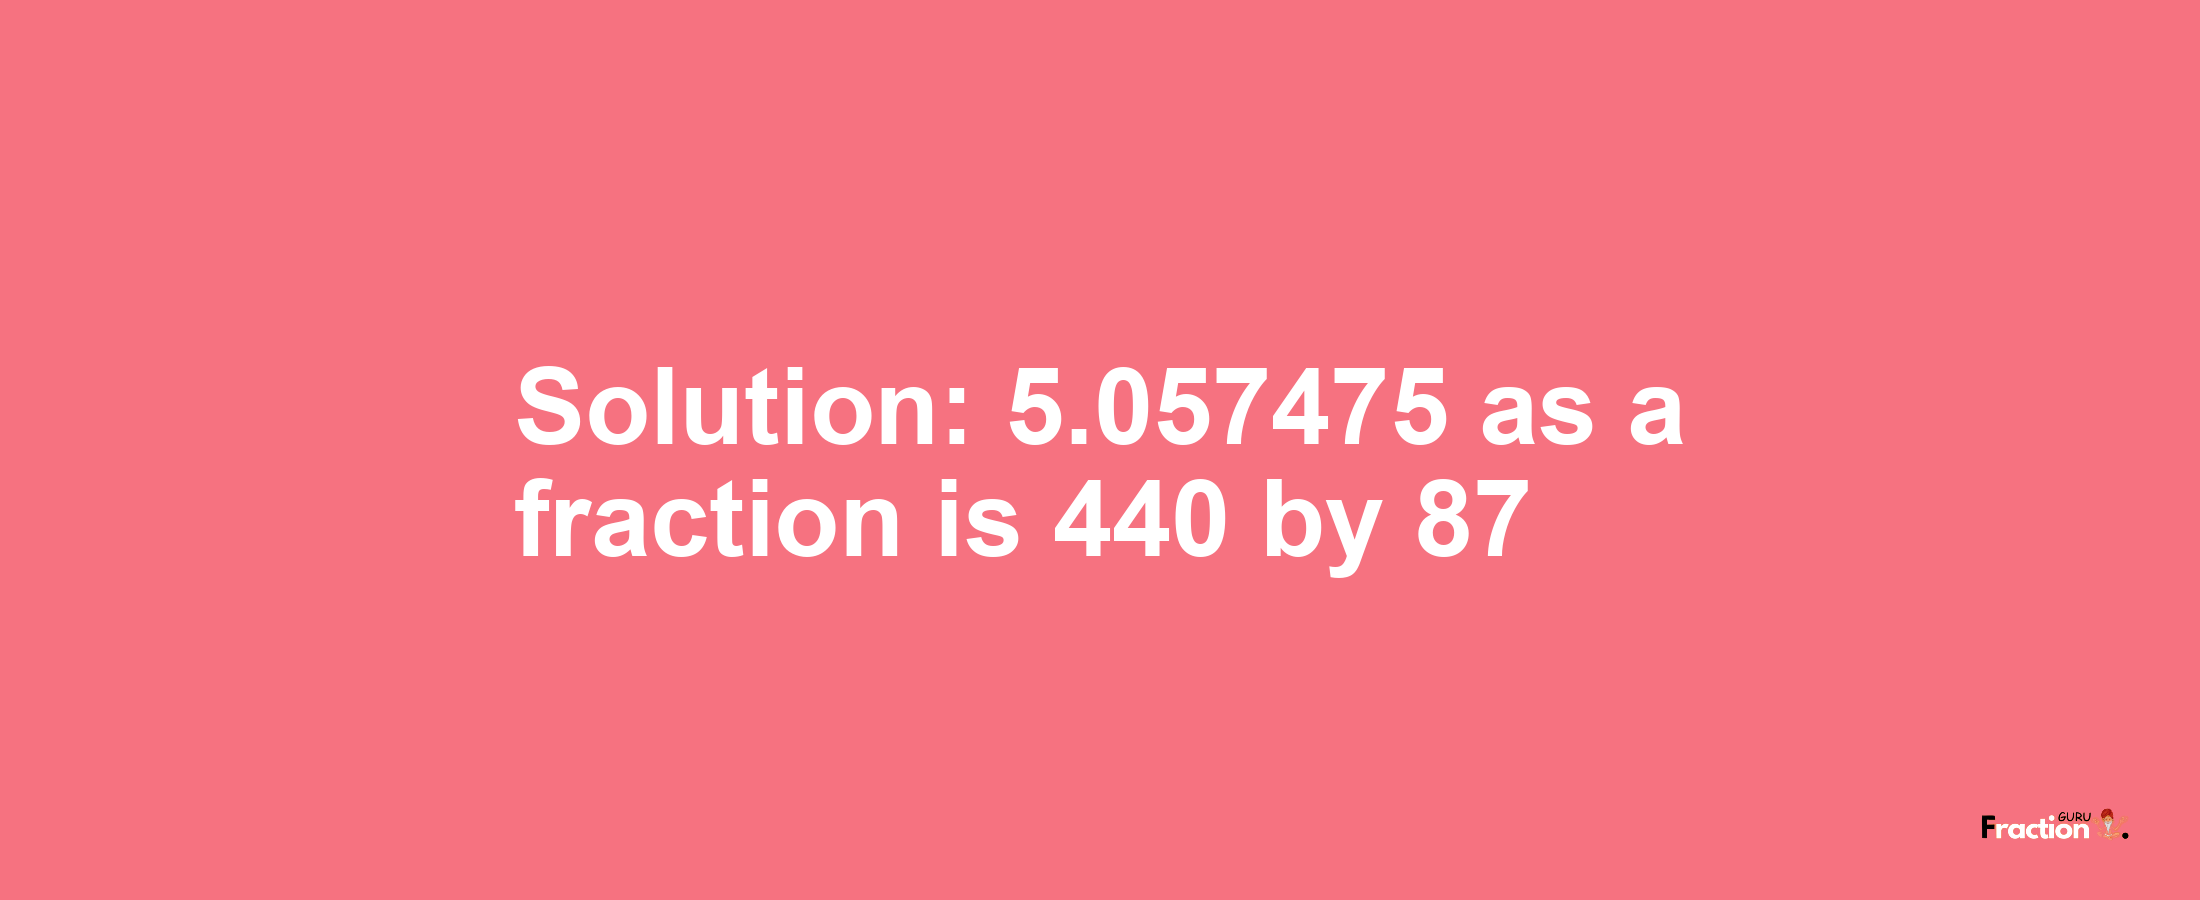 Solution:5.057475 as a fraction is 440/87